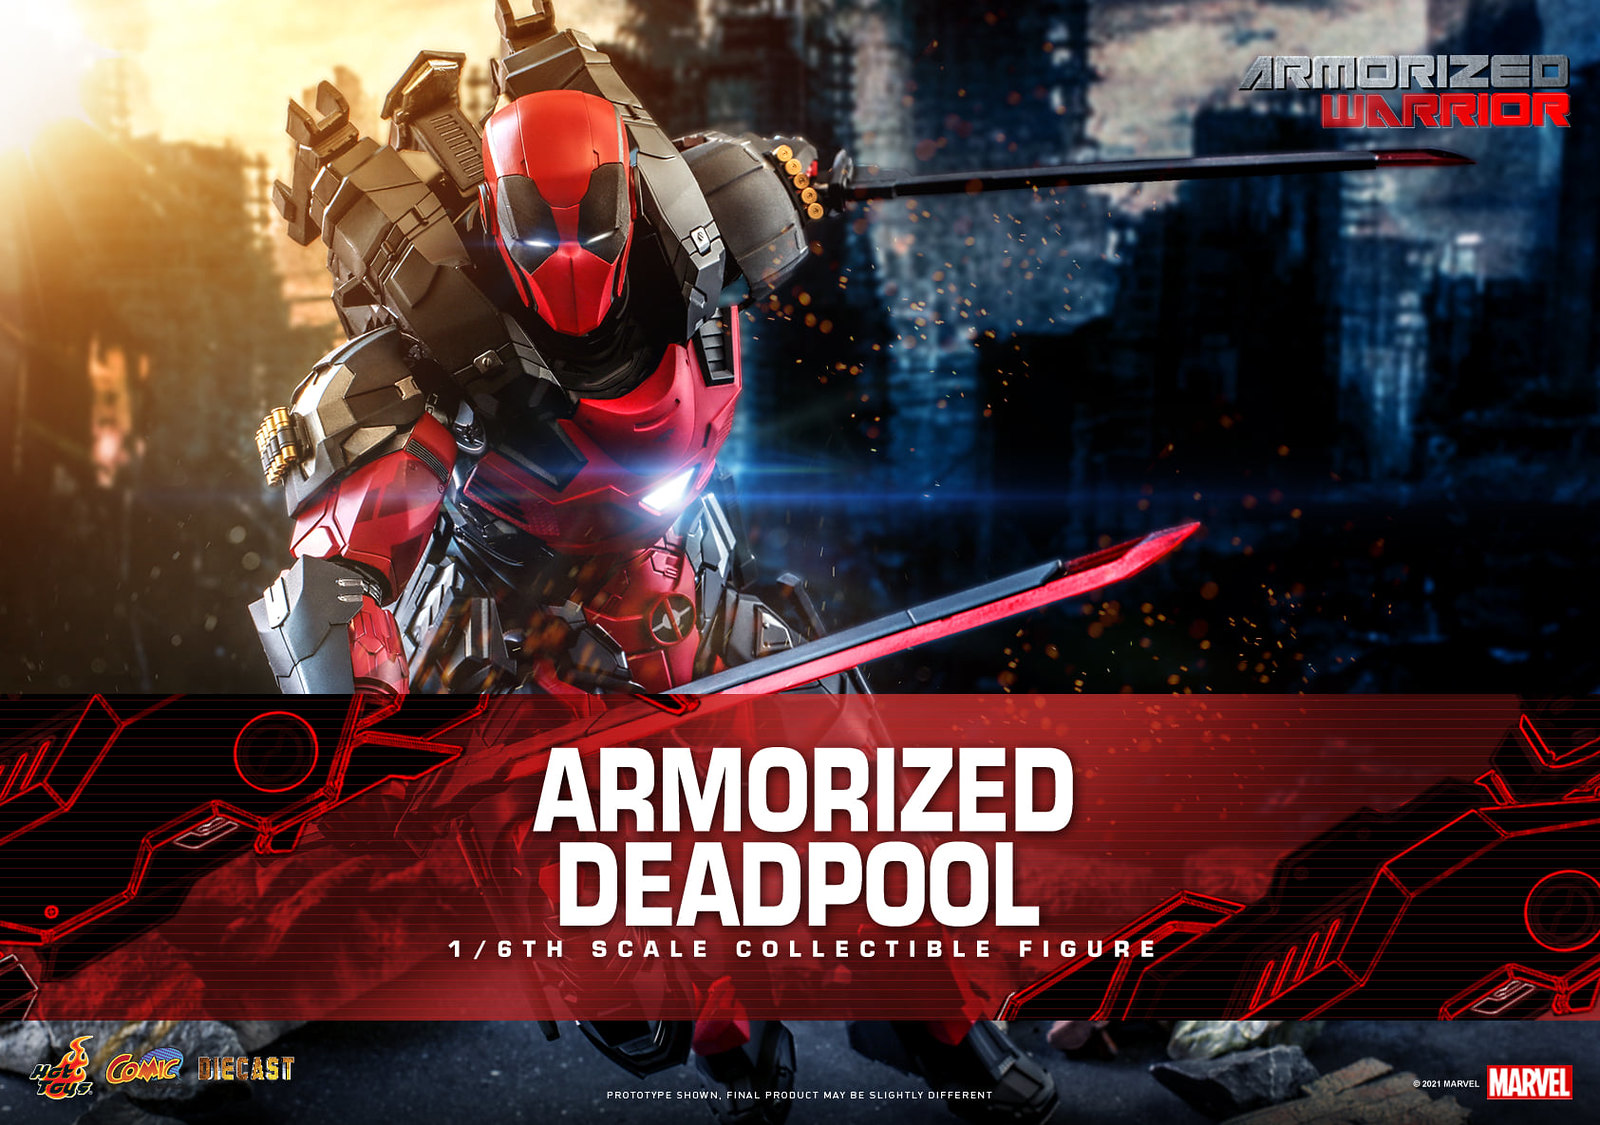 NEW PRODUCT: Hot Toys Armorized Warrior - 1/6th scale Armorized Deadpool Collectible Figure [Armorized Warrior Collection] 51310495952_023d0f87cc_h